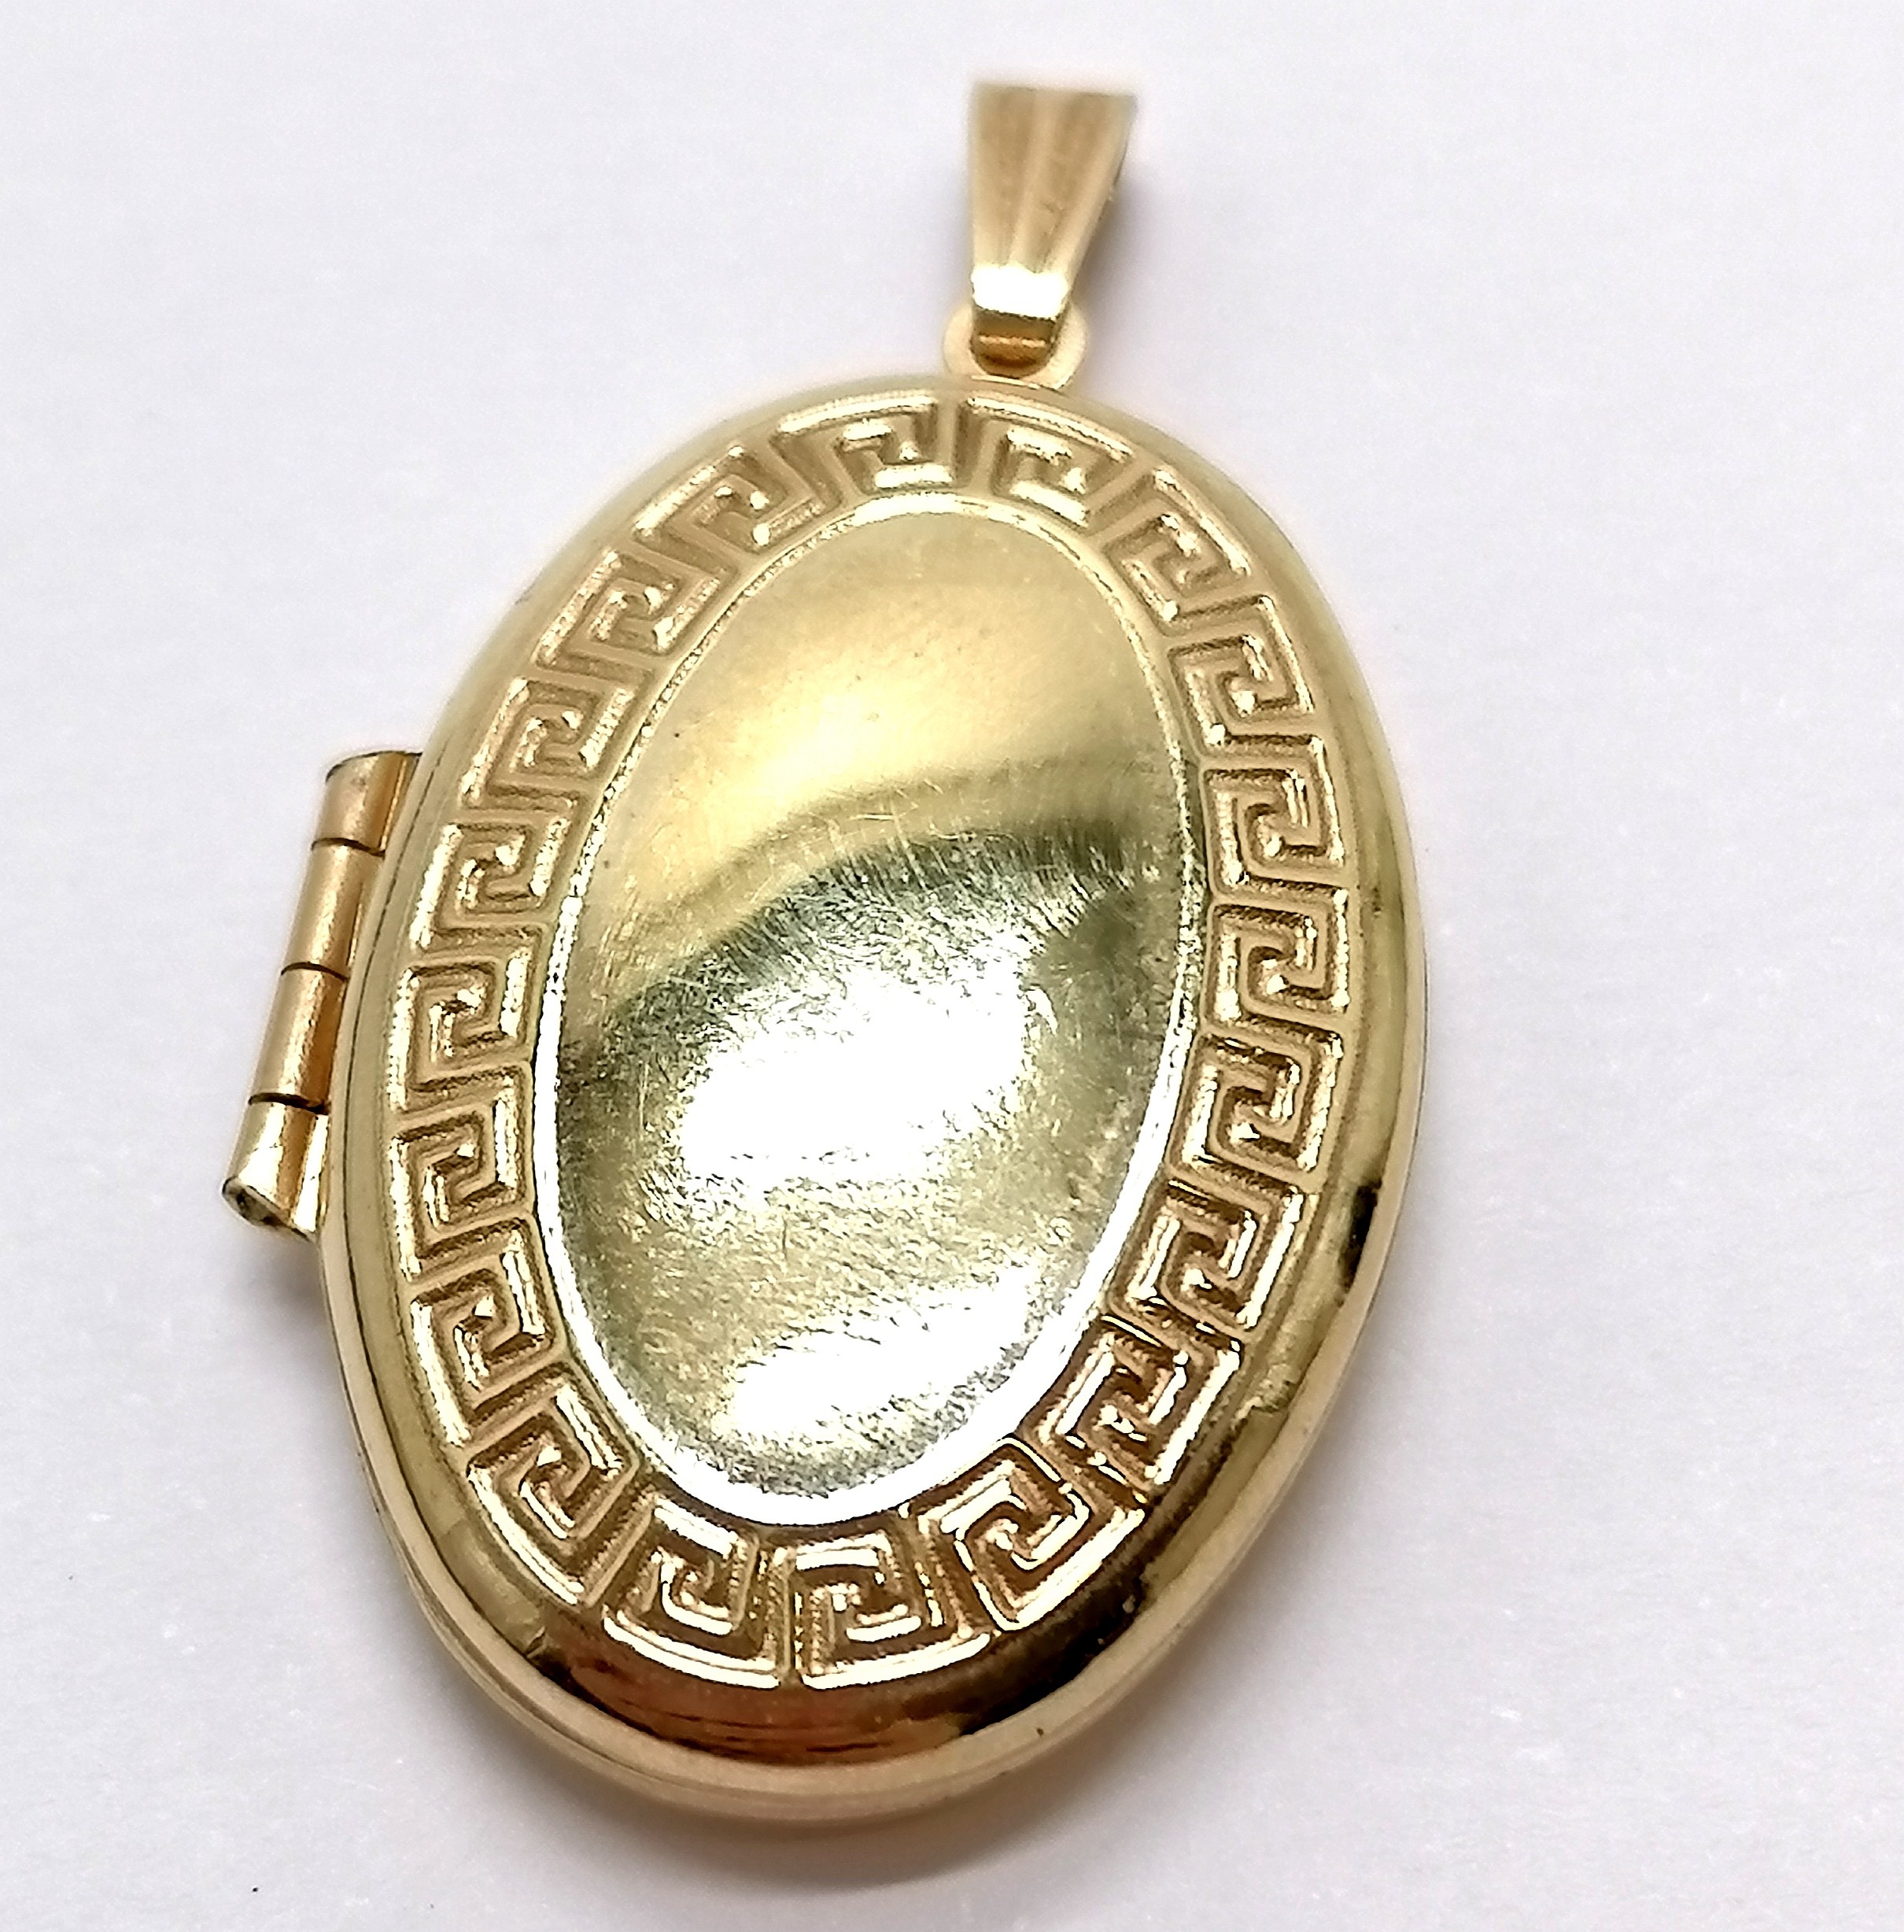 9ct hallmarked gold oval pendant locket with Greek key pattern (in unused condition) - 3.2g total